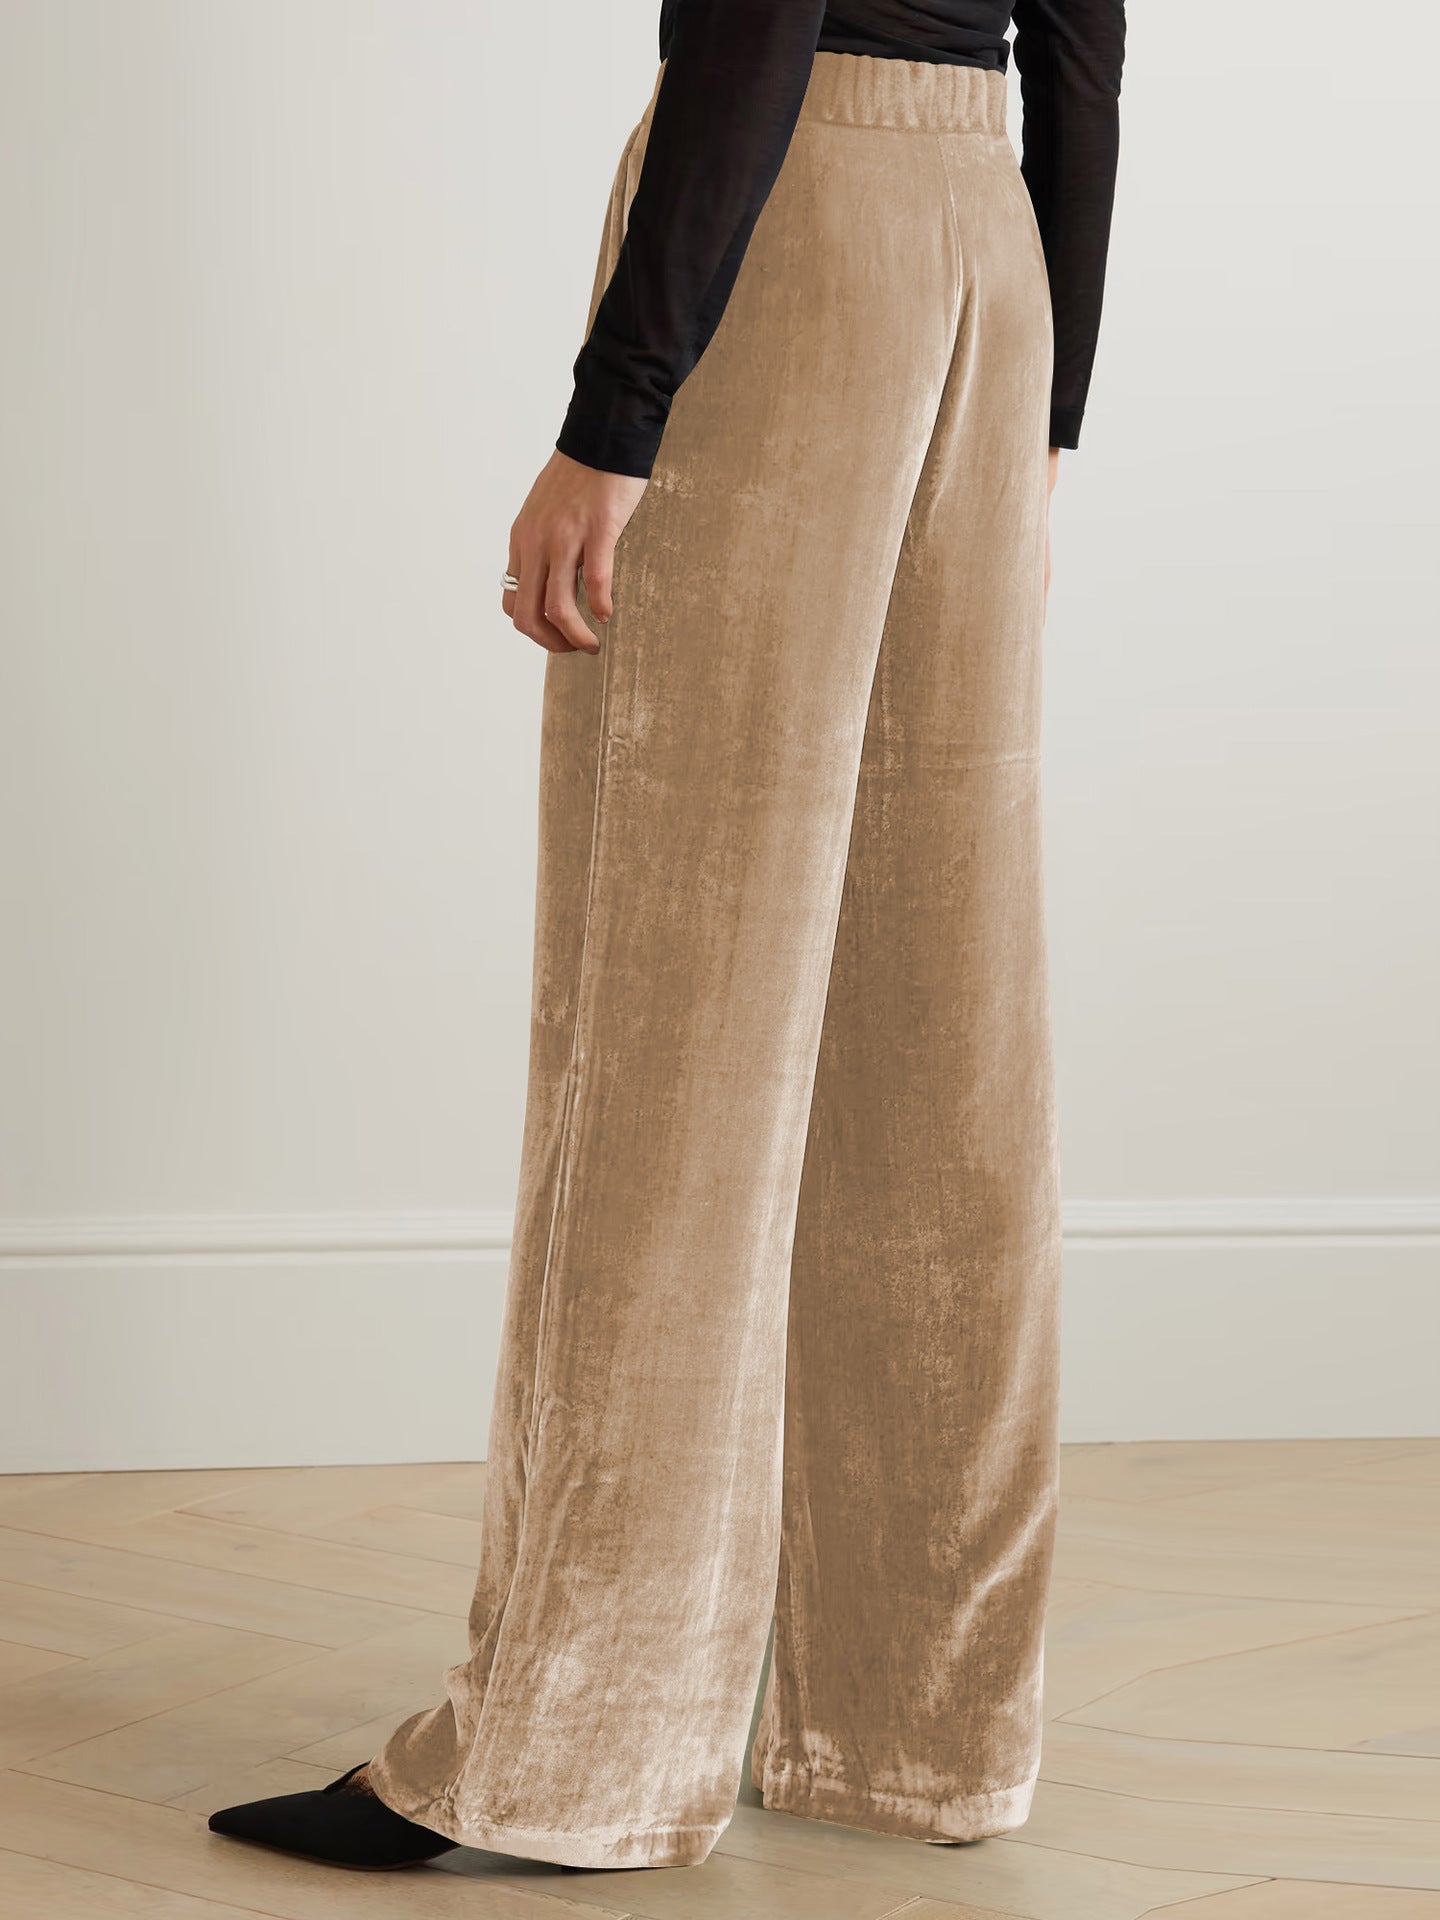 French Office Trousers Women Clothing Summer Gold Velvet Drooping Wide Leg Pants Loose Casual Pants for Women